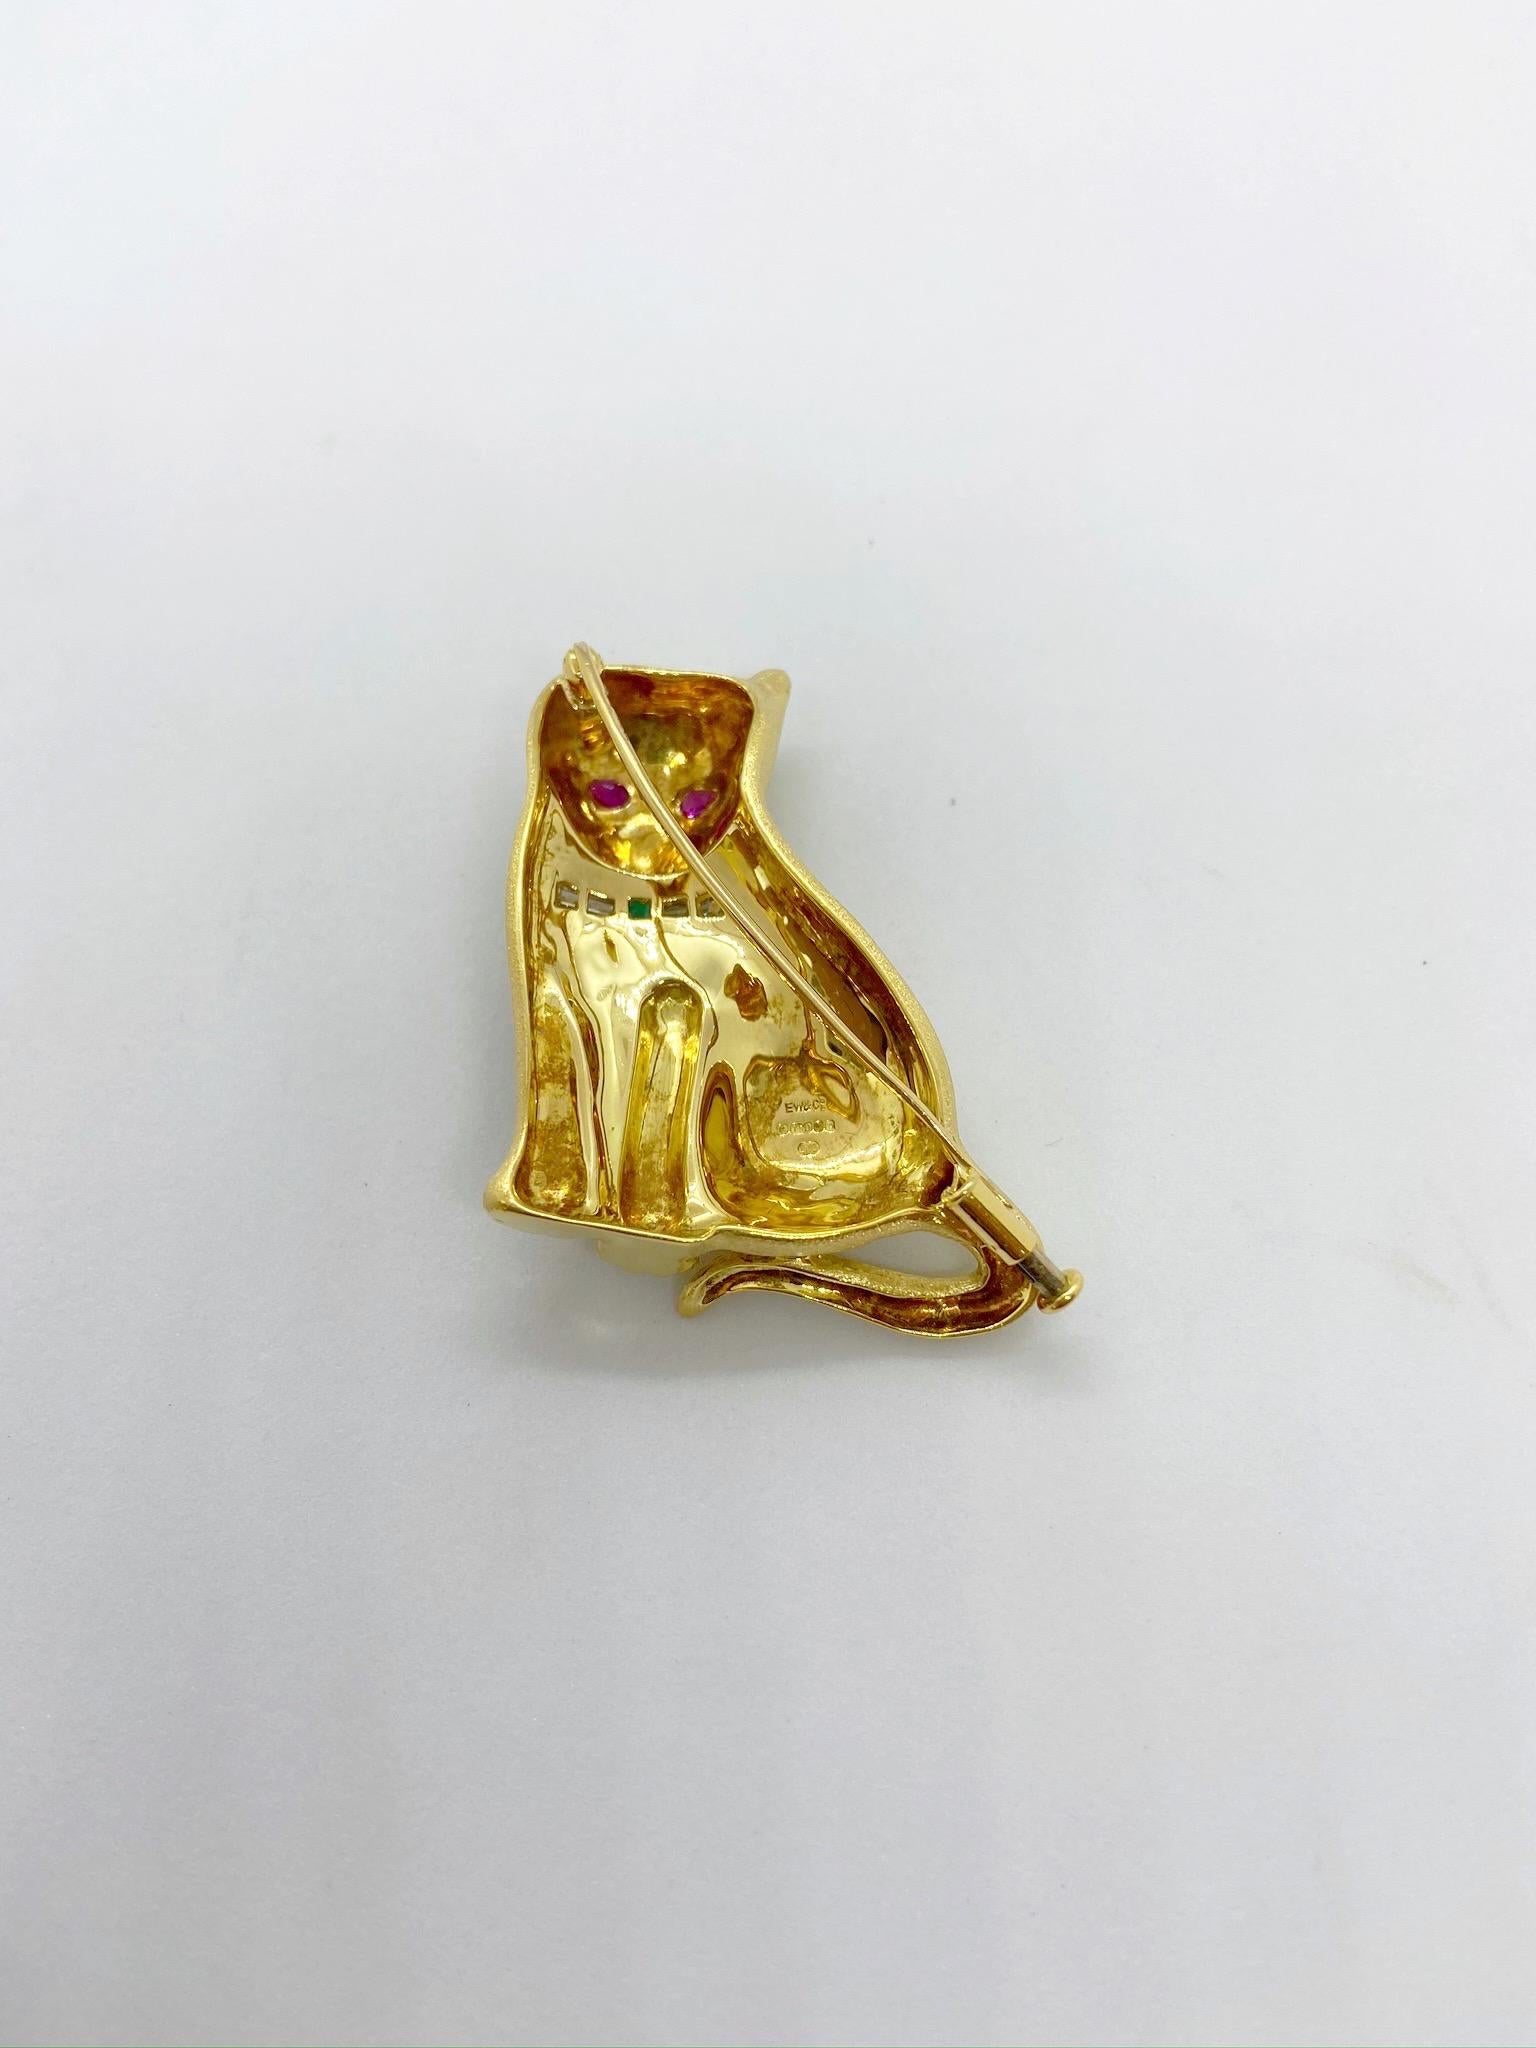 Retro E. Wolfe & Co. 18 Karat Yellow Gold Cat Brooch with Diamond, Emerald and Ruby